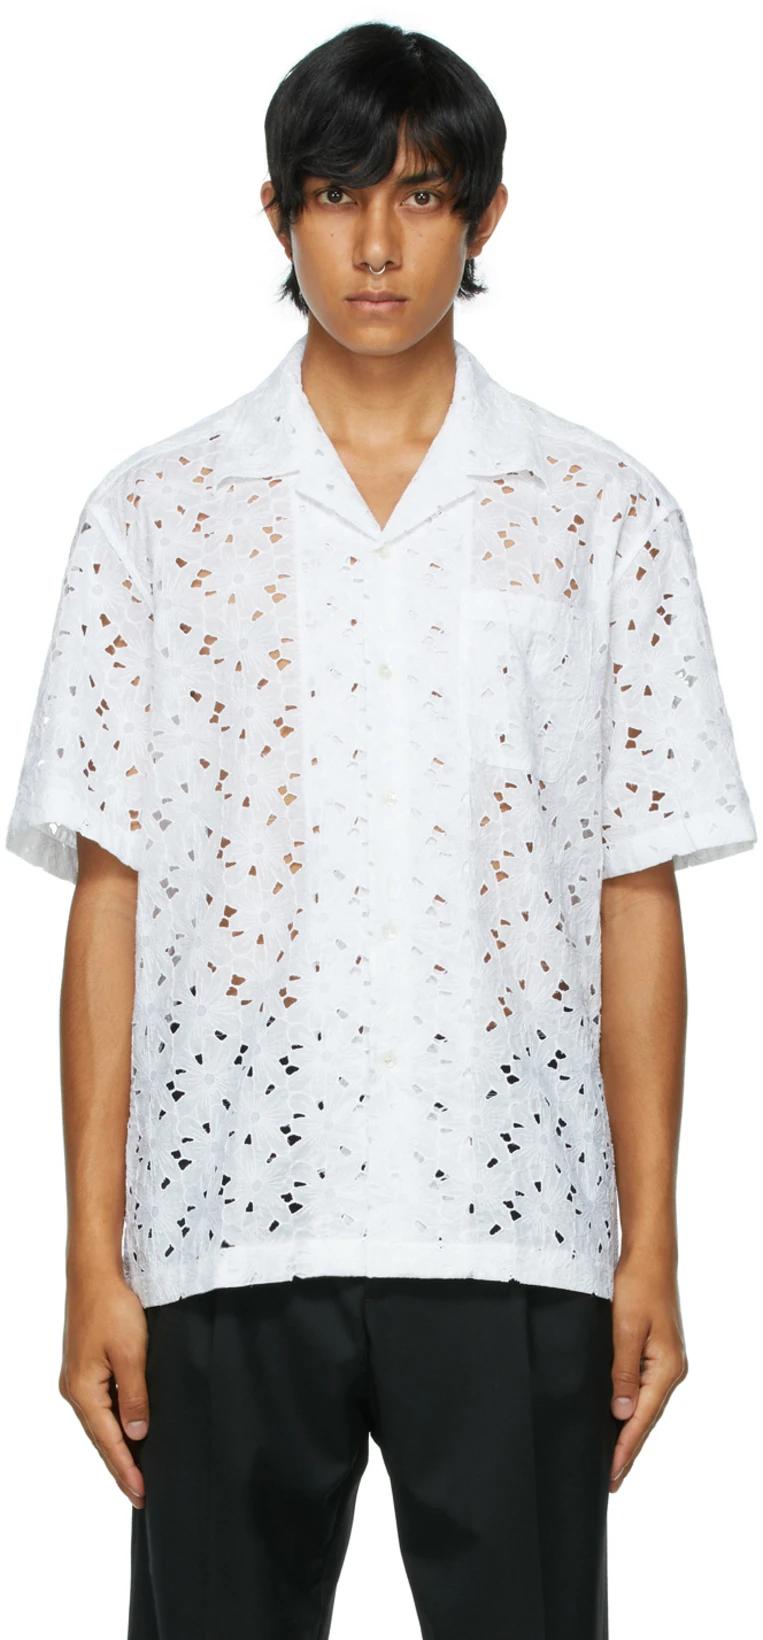 White Ture Broderie Anglaise Short Sleeve Shirt by CMMN SWDN